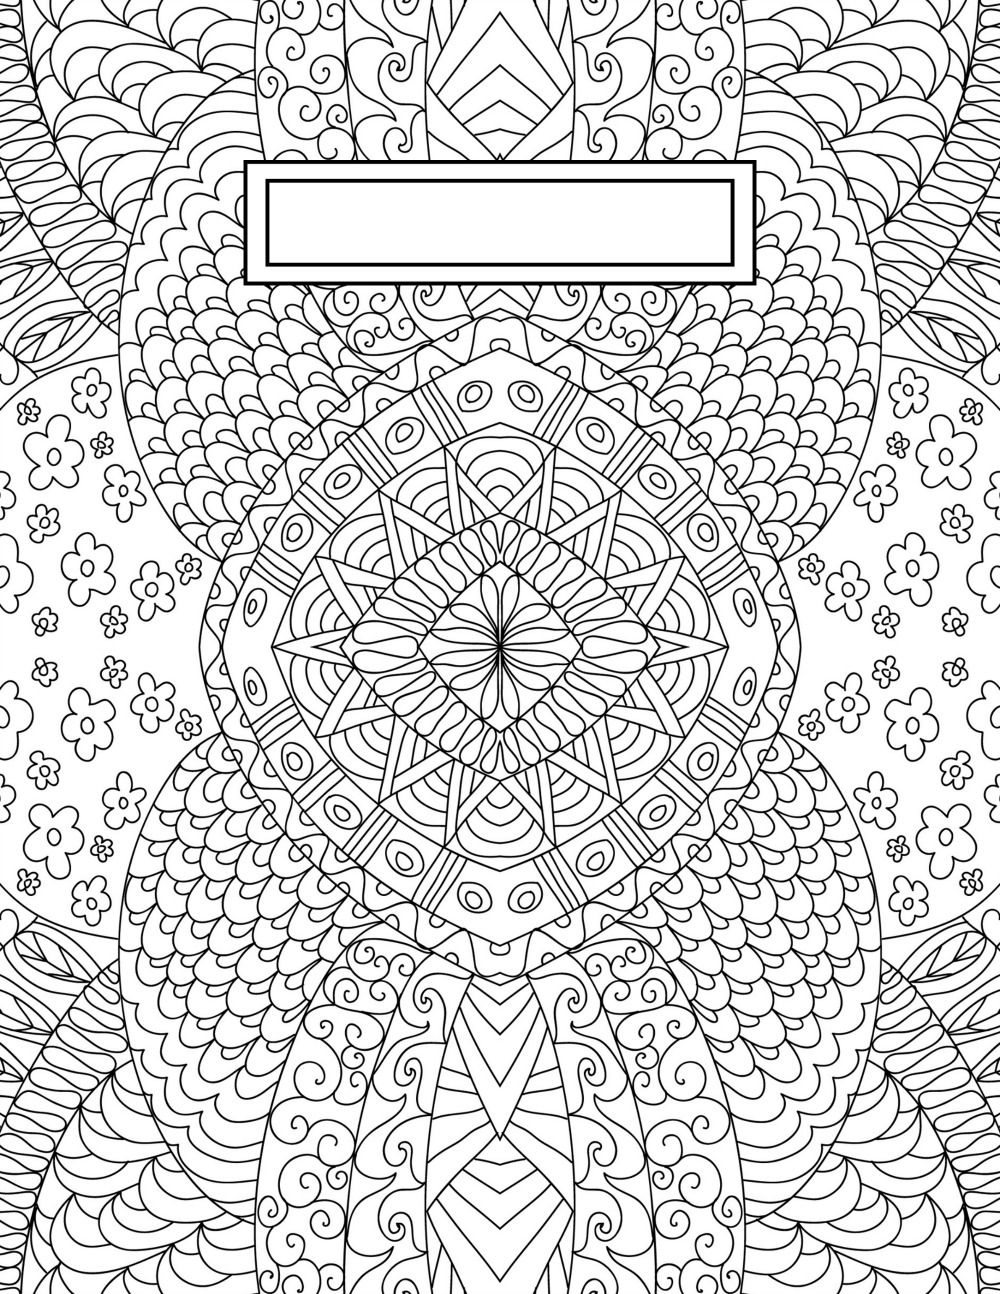 Back To School Binder Cover Adult Coloring Pages | Bullet Journaling - Free Printable Binder Covers To Color